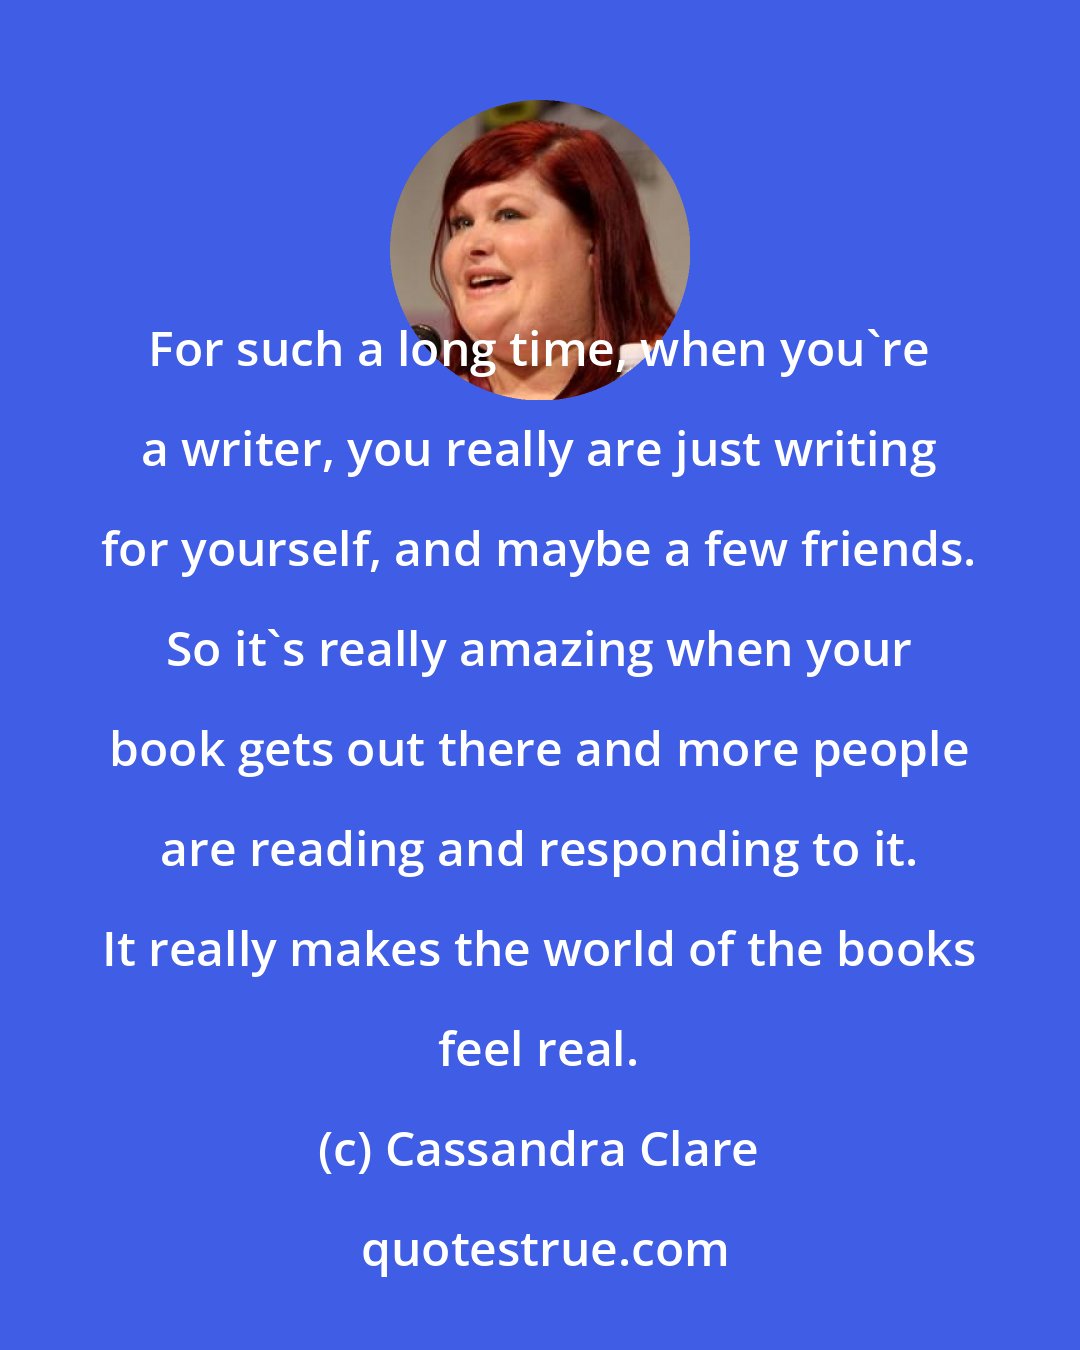 Cassandra Clare: For such a long time, when you're a writer, you really are just writing for yourself, and maybe a few friends. So it's really amazing when your book gets out there and more people are reading and responding to it. It really makes the world of the books feel real.